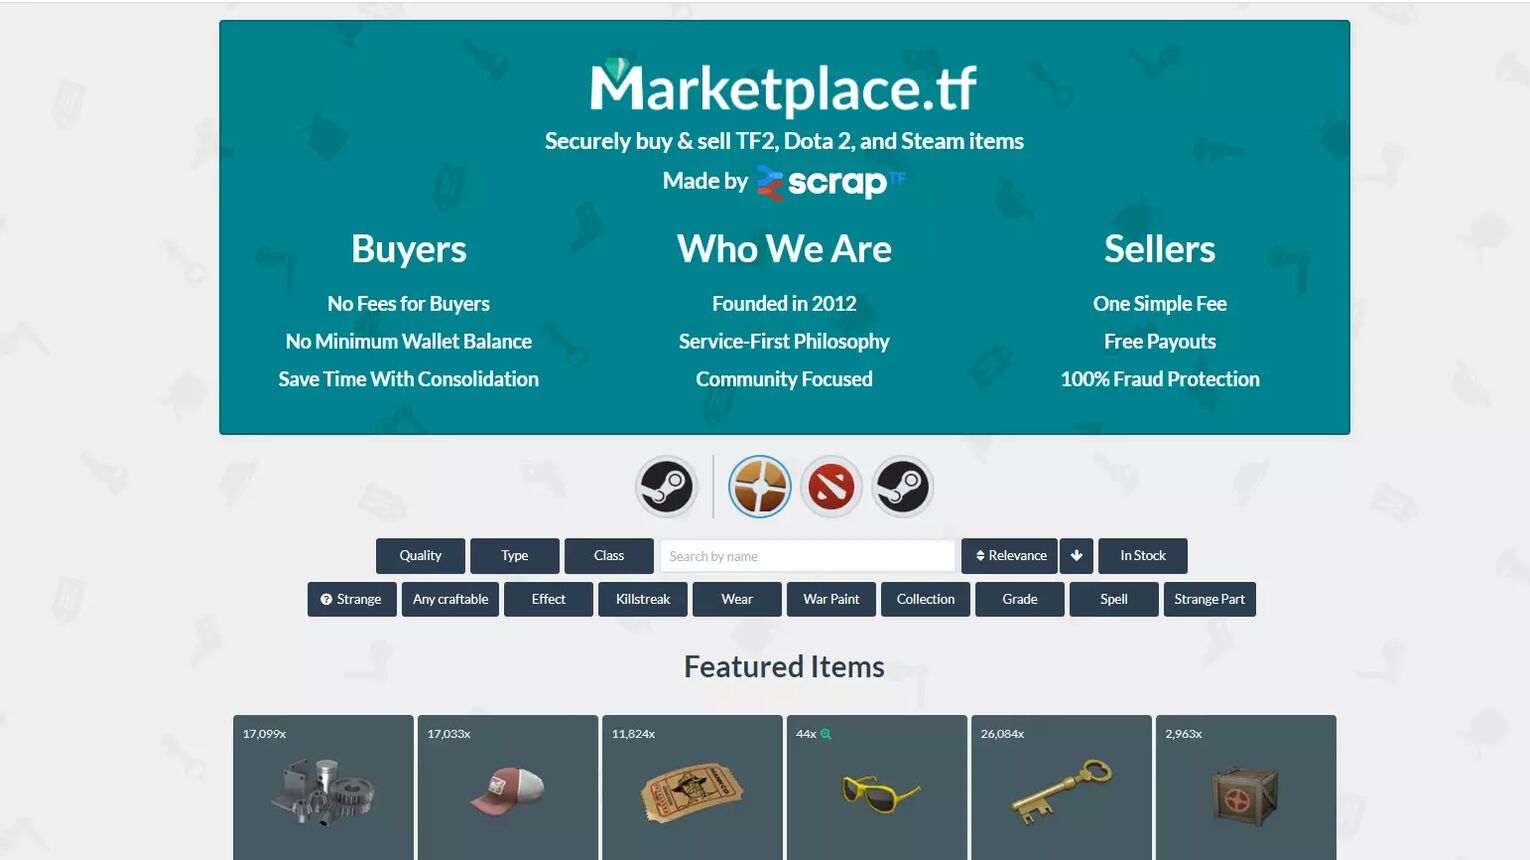 Marketplace.tf Home Page